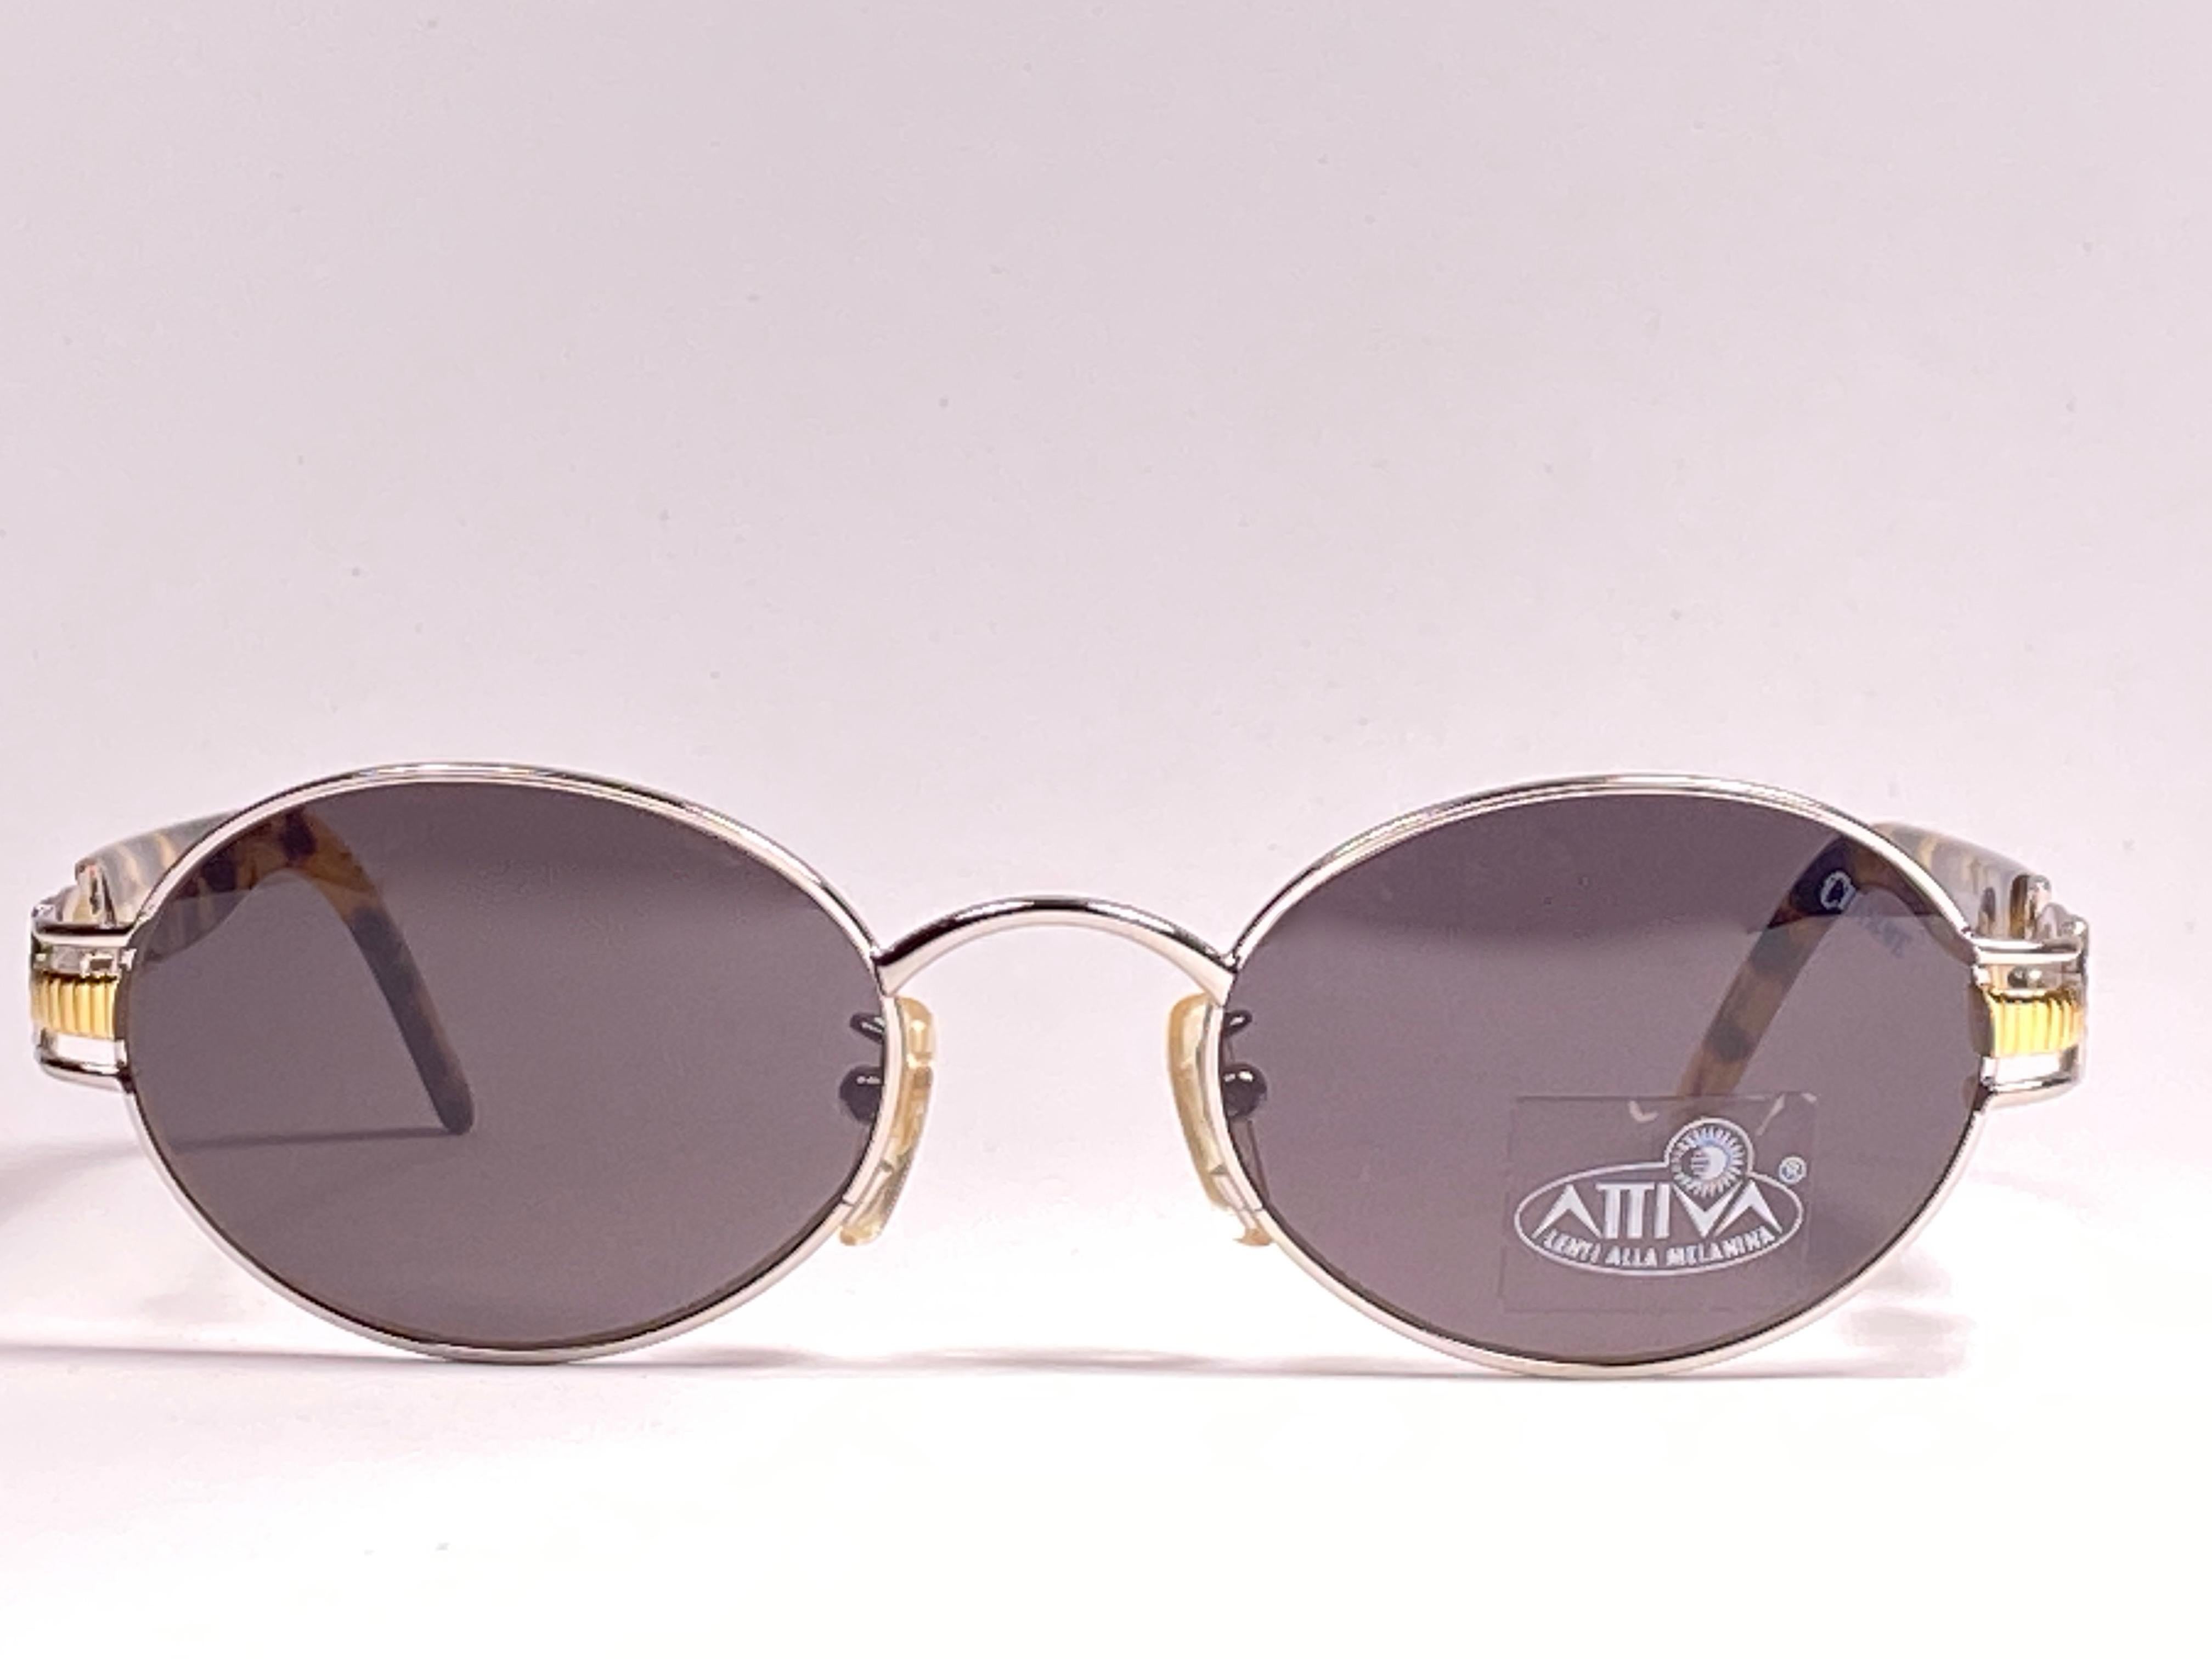 New Charme silver & gold pharaoh accents frame with grey ( UV protection ) lenses.

Made in Italy.

Produced and design in 1990's.

New, never worn or displayed. this item may show minor sign of wear due to storage.